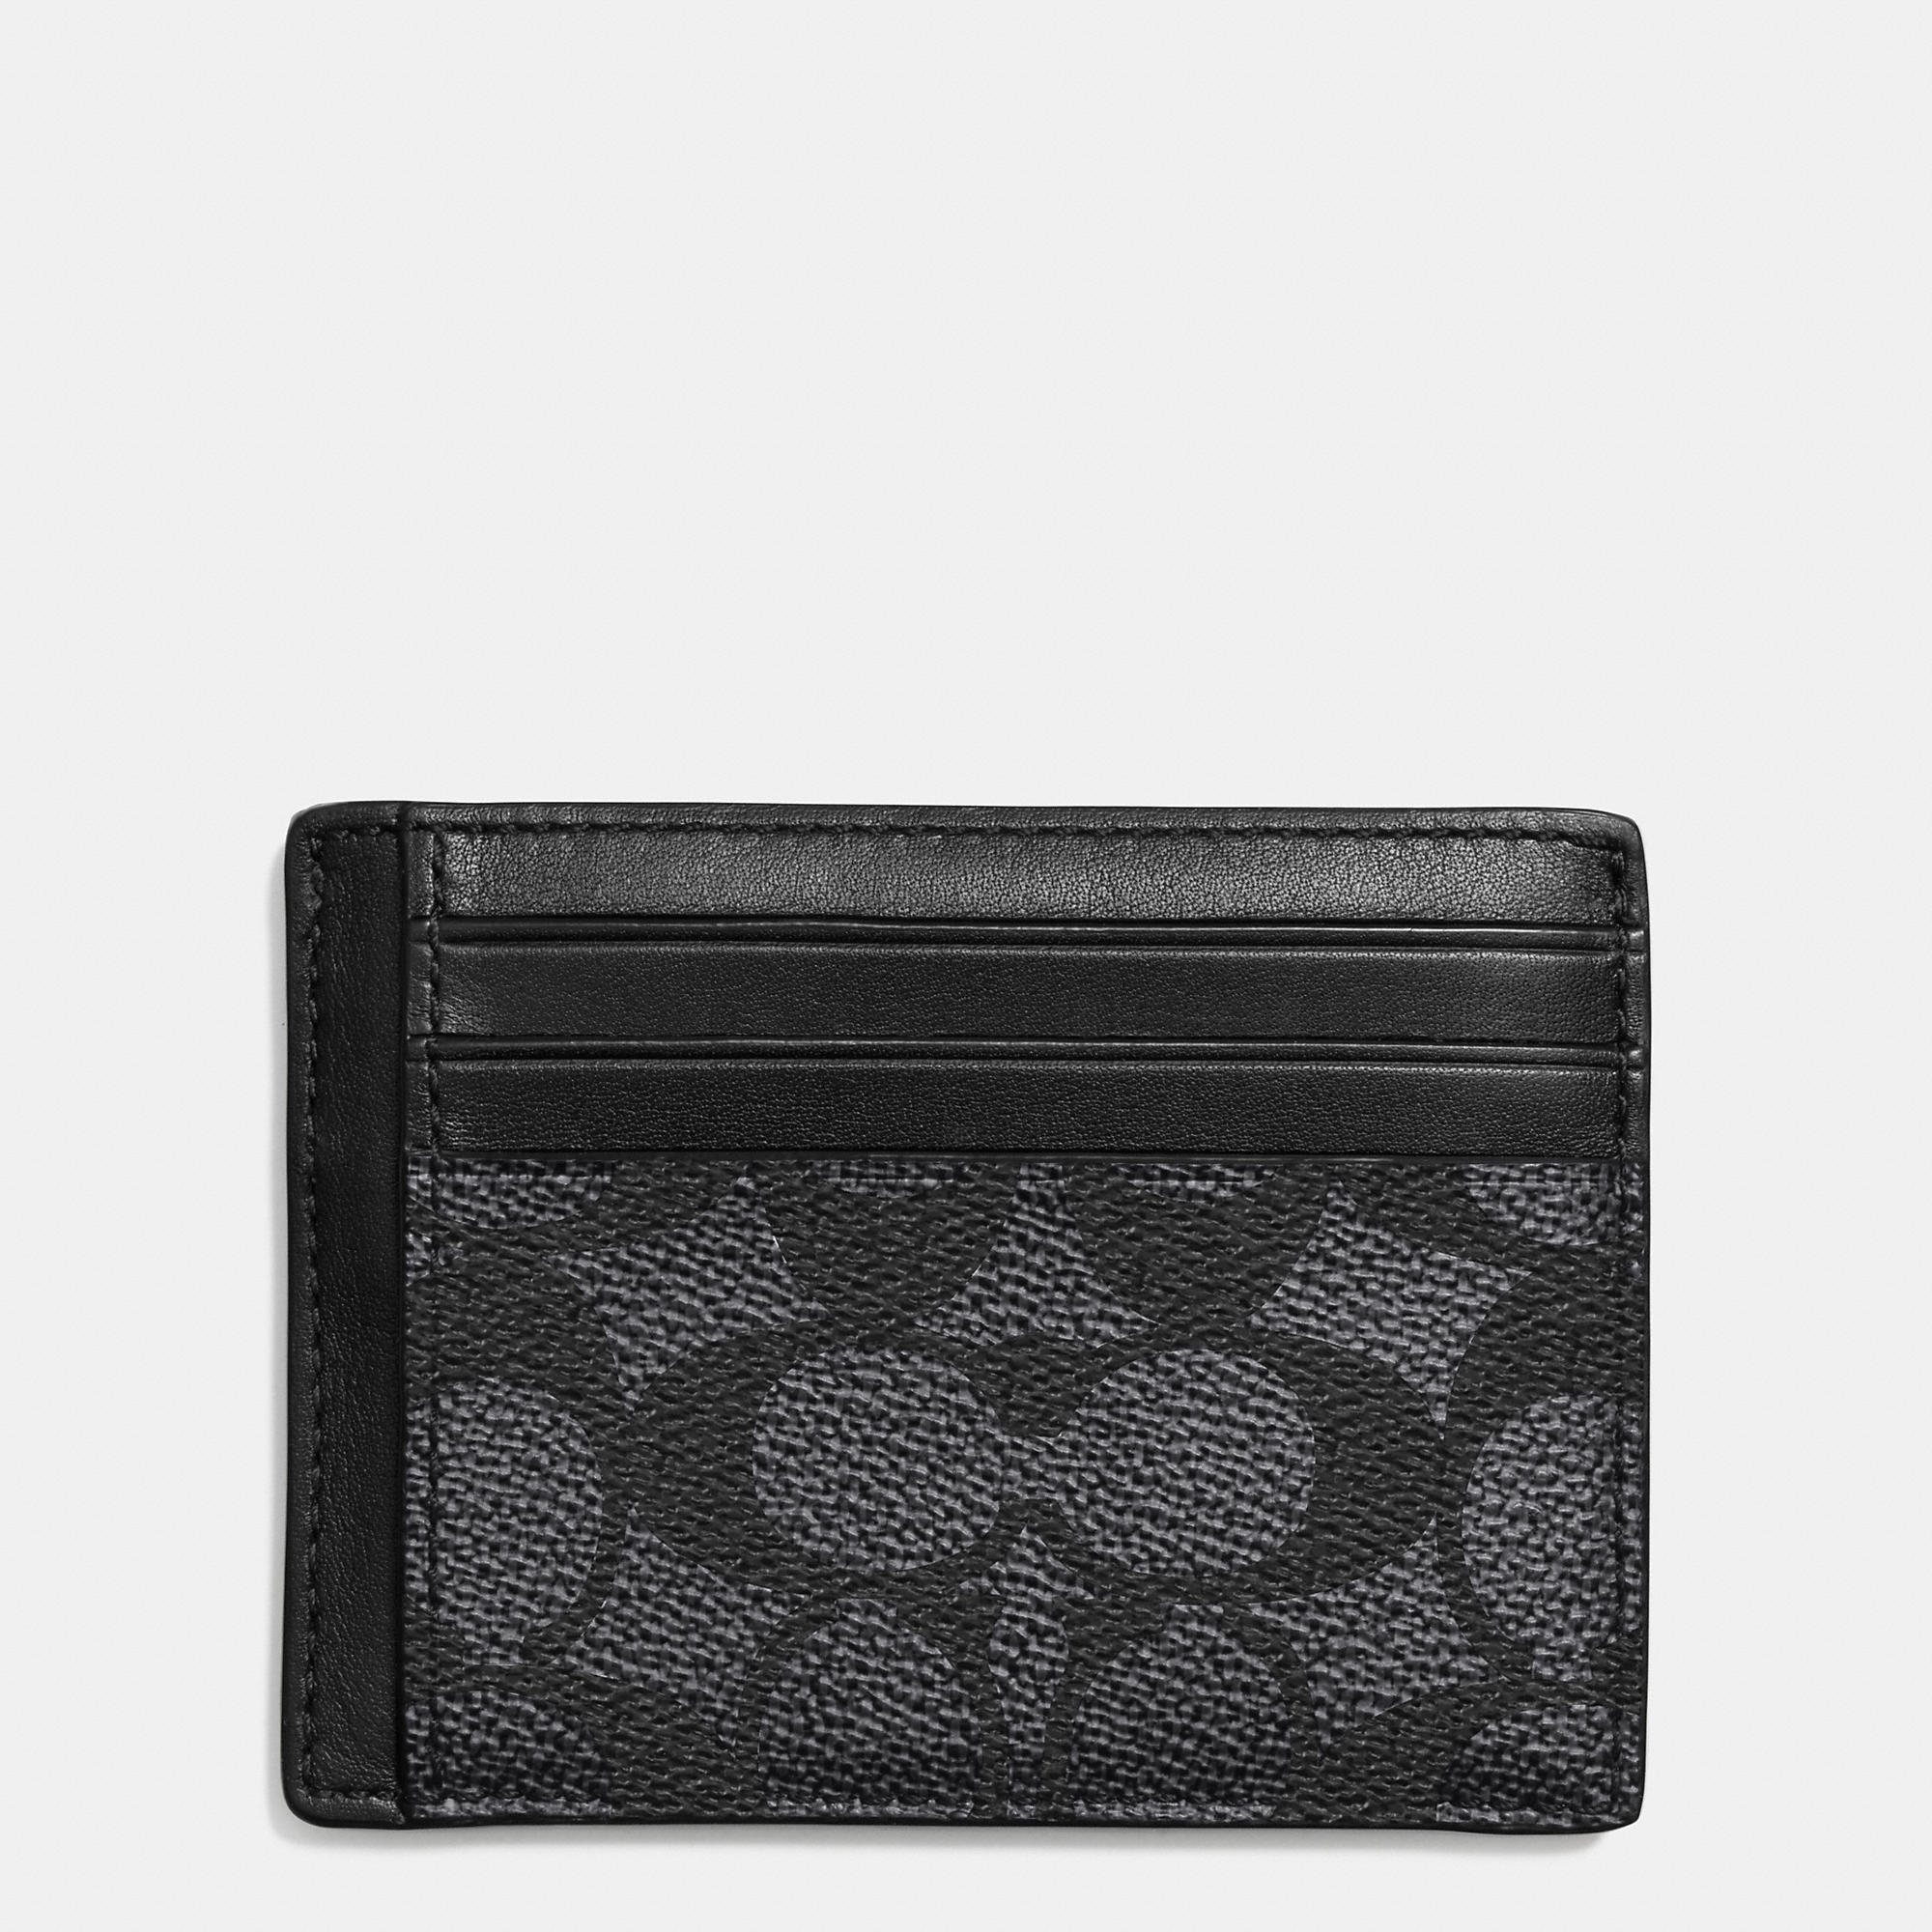 Lyst - Coach Id Card Case In Embossed Signature Canvas in ...